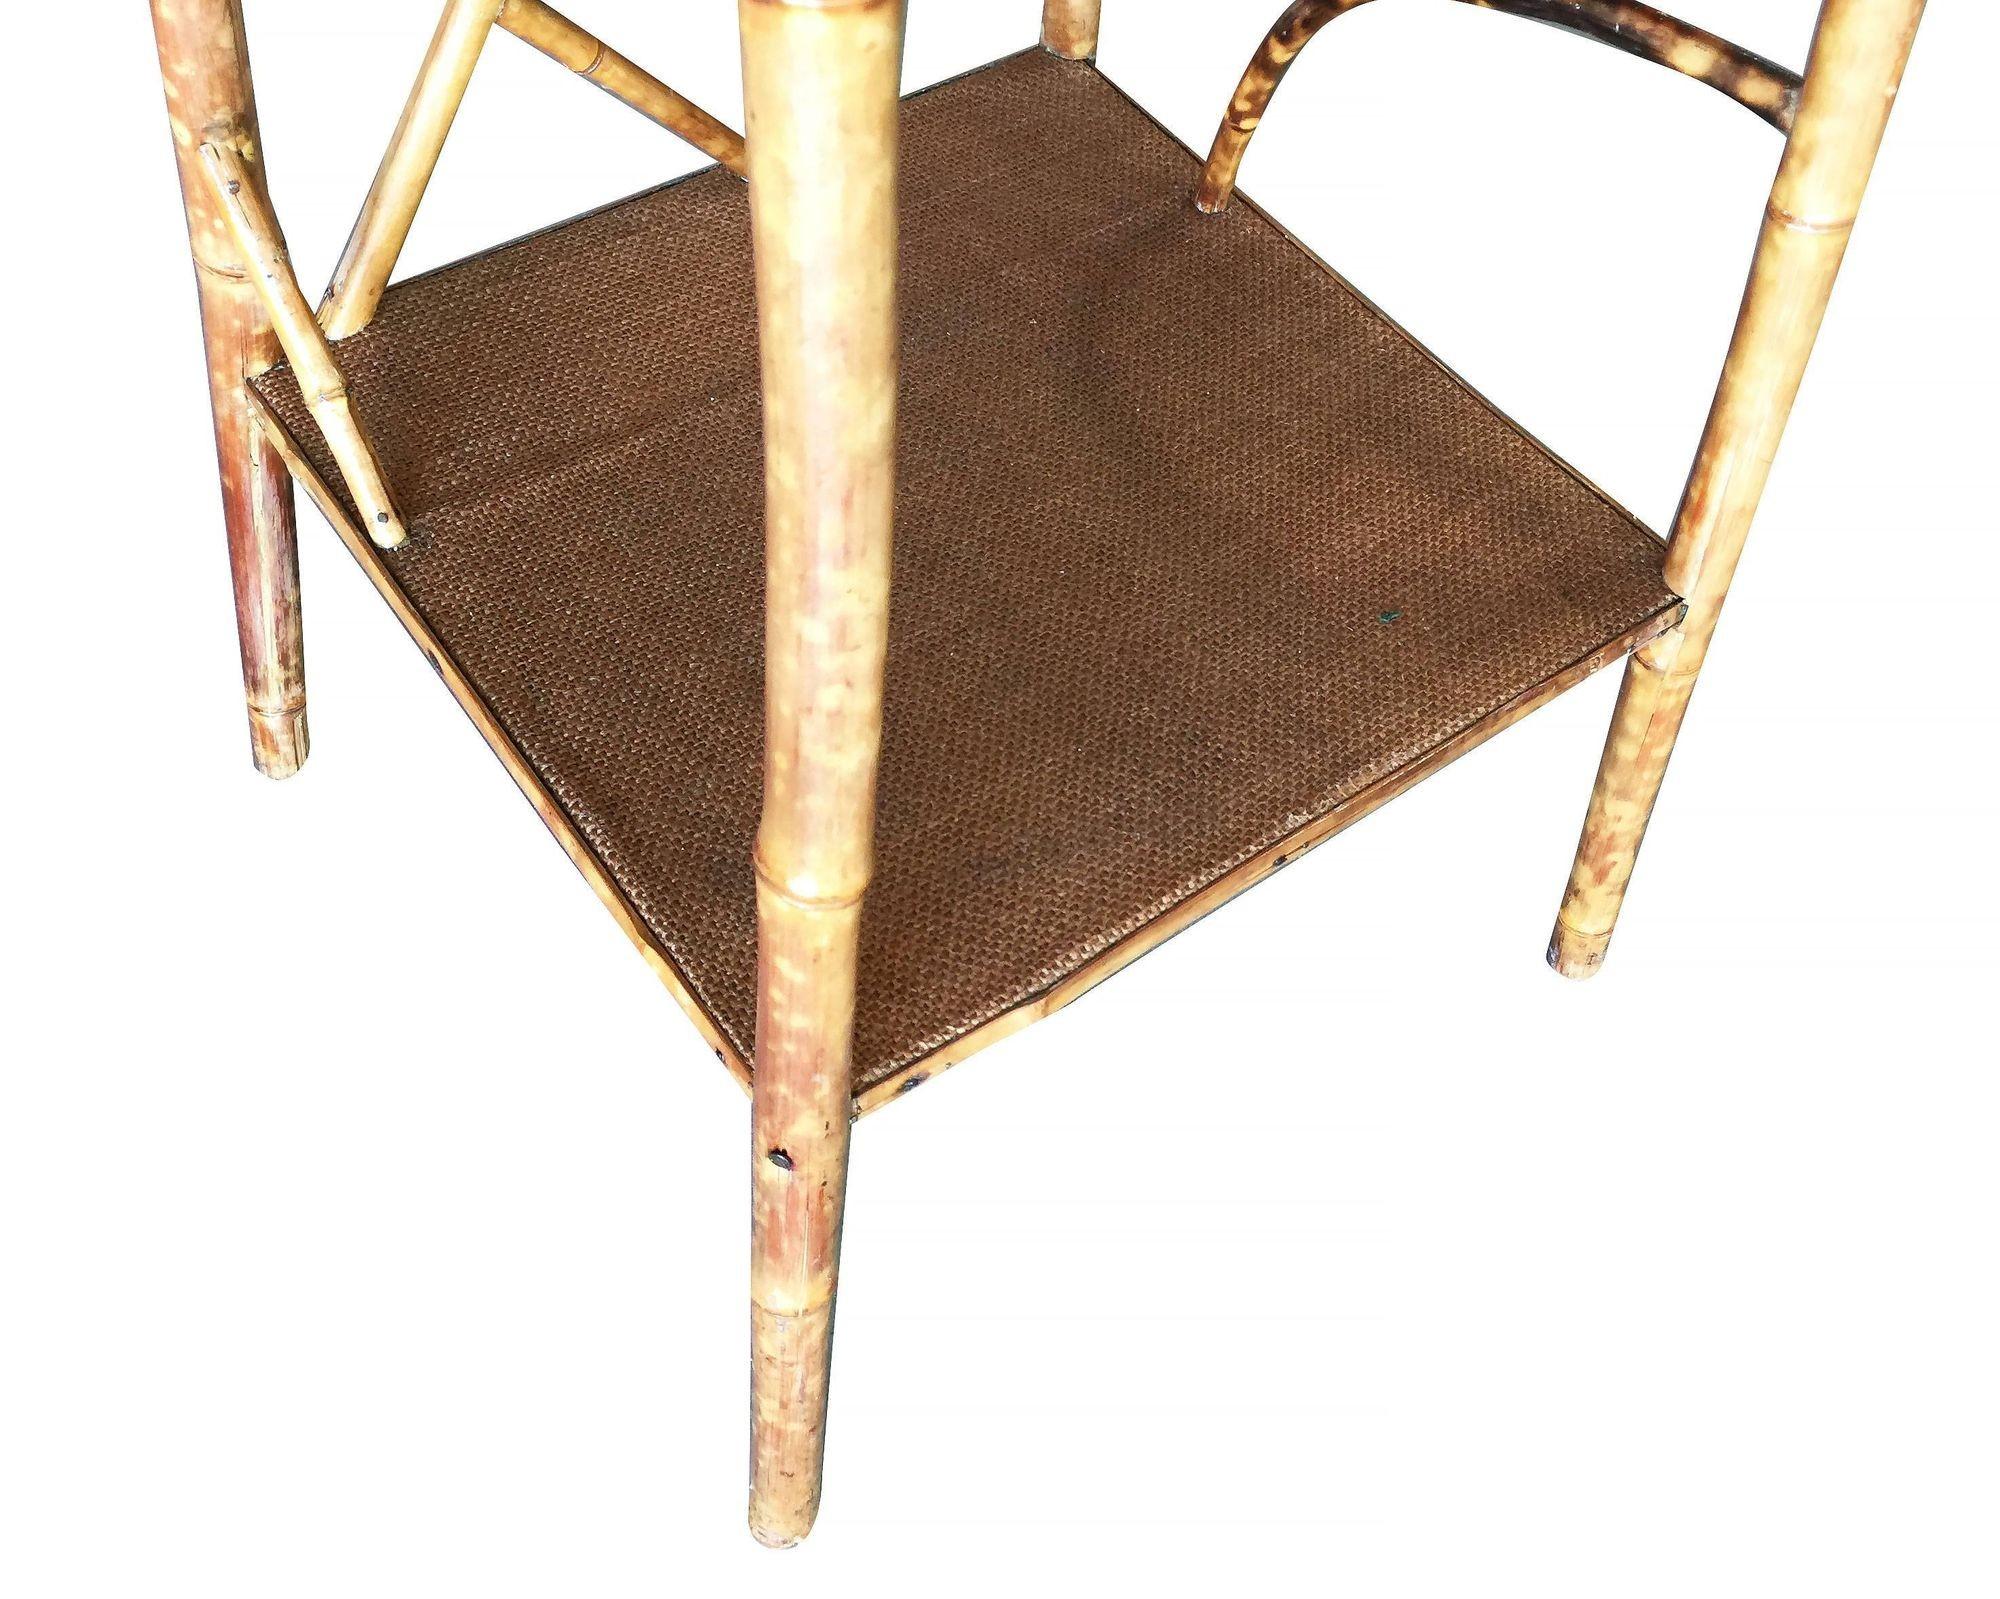 Antique tiger bamboo pedestal side table with rice mat top organically formed accents and secondary bottom shelf.

1930, United States

We only purchase and sell only the best and finest rattan furniture made by the best and most well-known